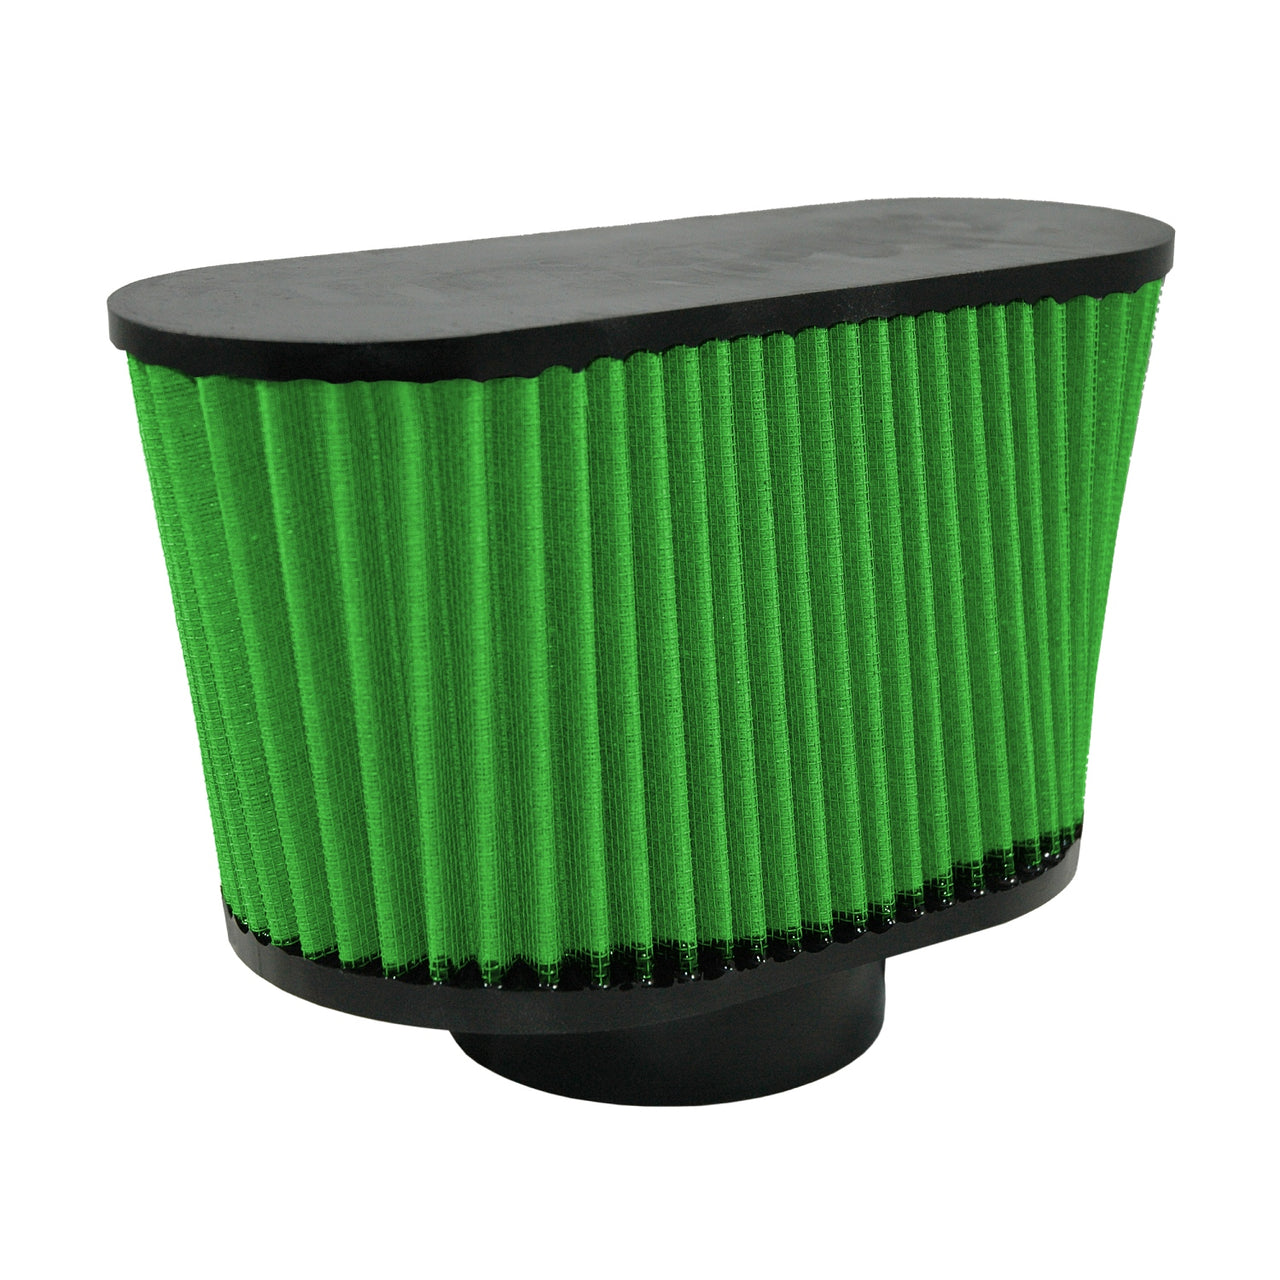 Green Filter Clamp On Oval Filter - ID 3.75in / Base 8.69in x 5.69in / Top 10.81in x 3.94in / H 6in